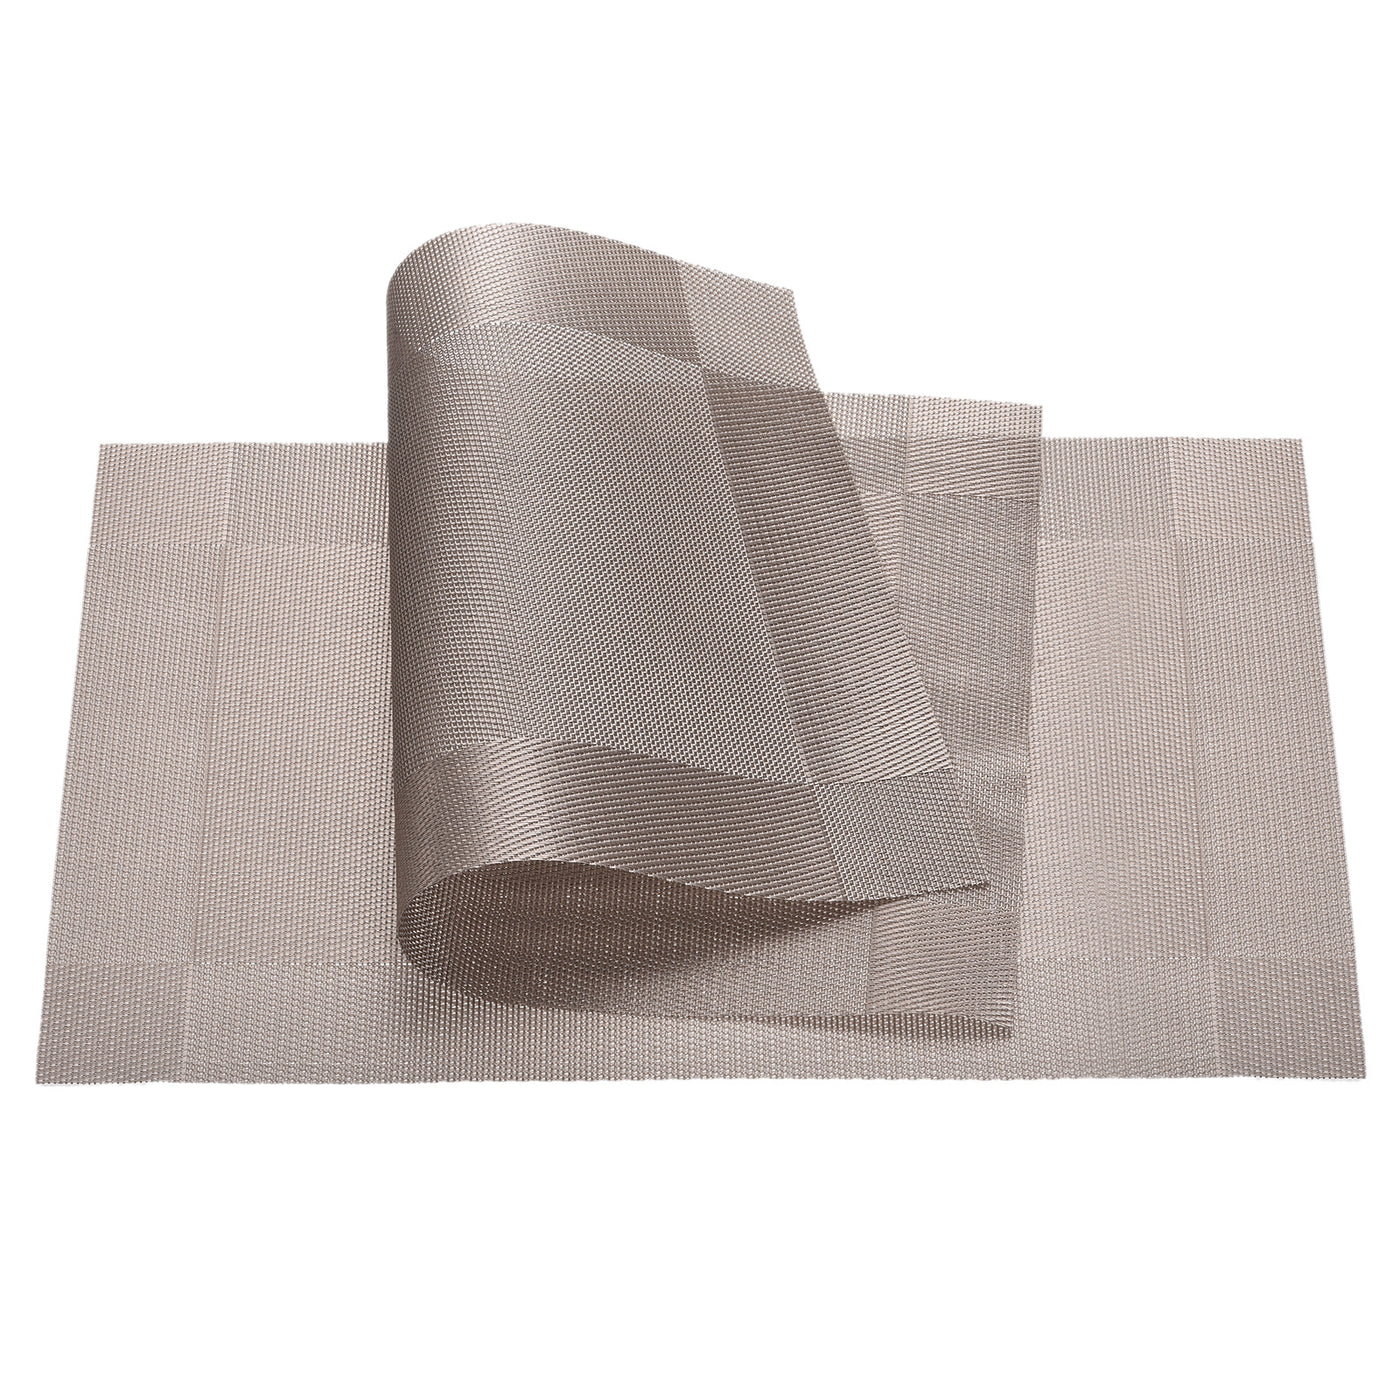 uxcell Uxcell Place Mats 450x300mm 8pcs PVC Table Washable Woven Placemat, Gold Brown